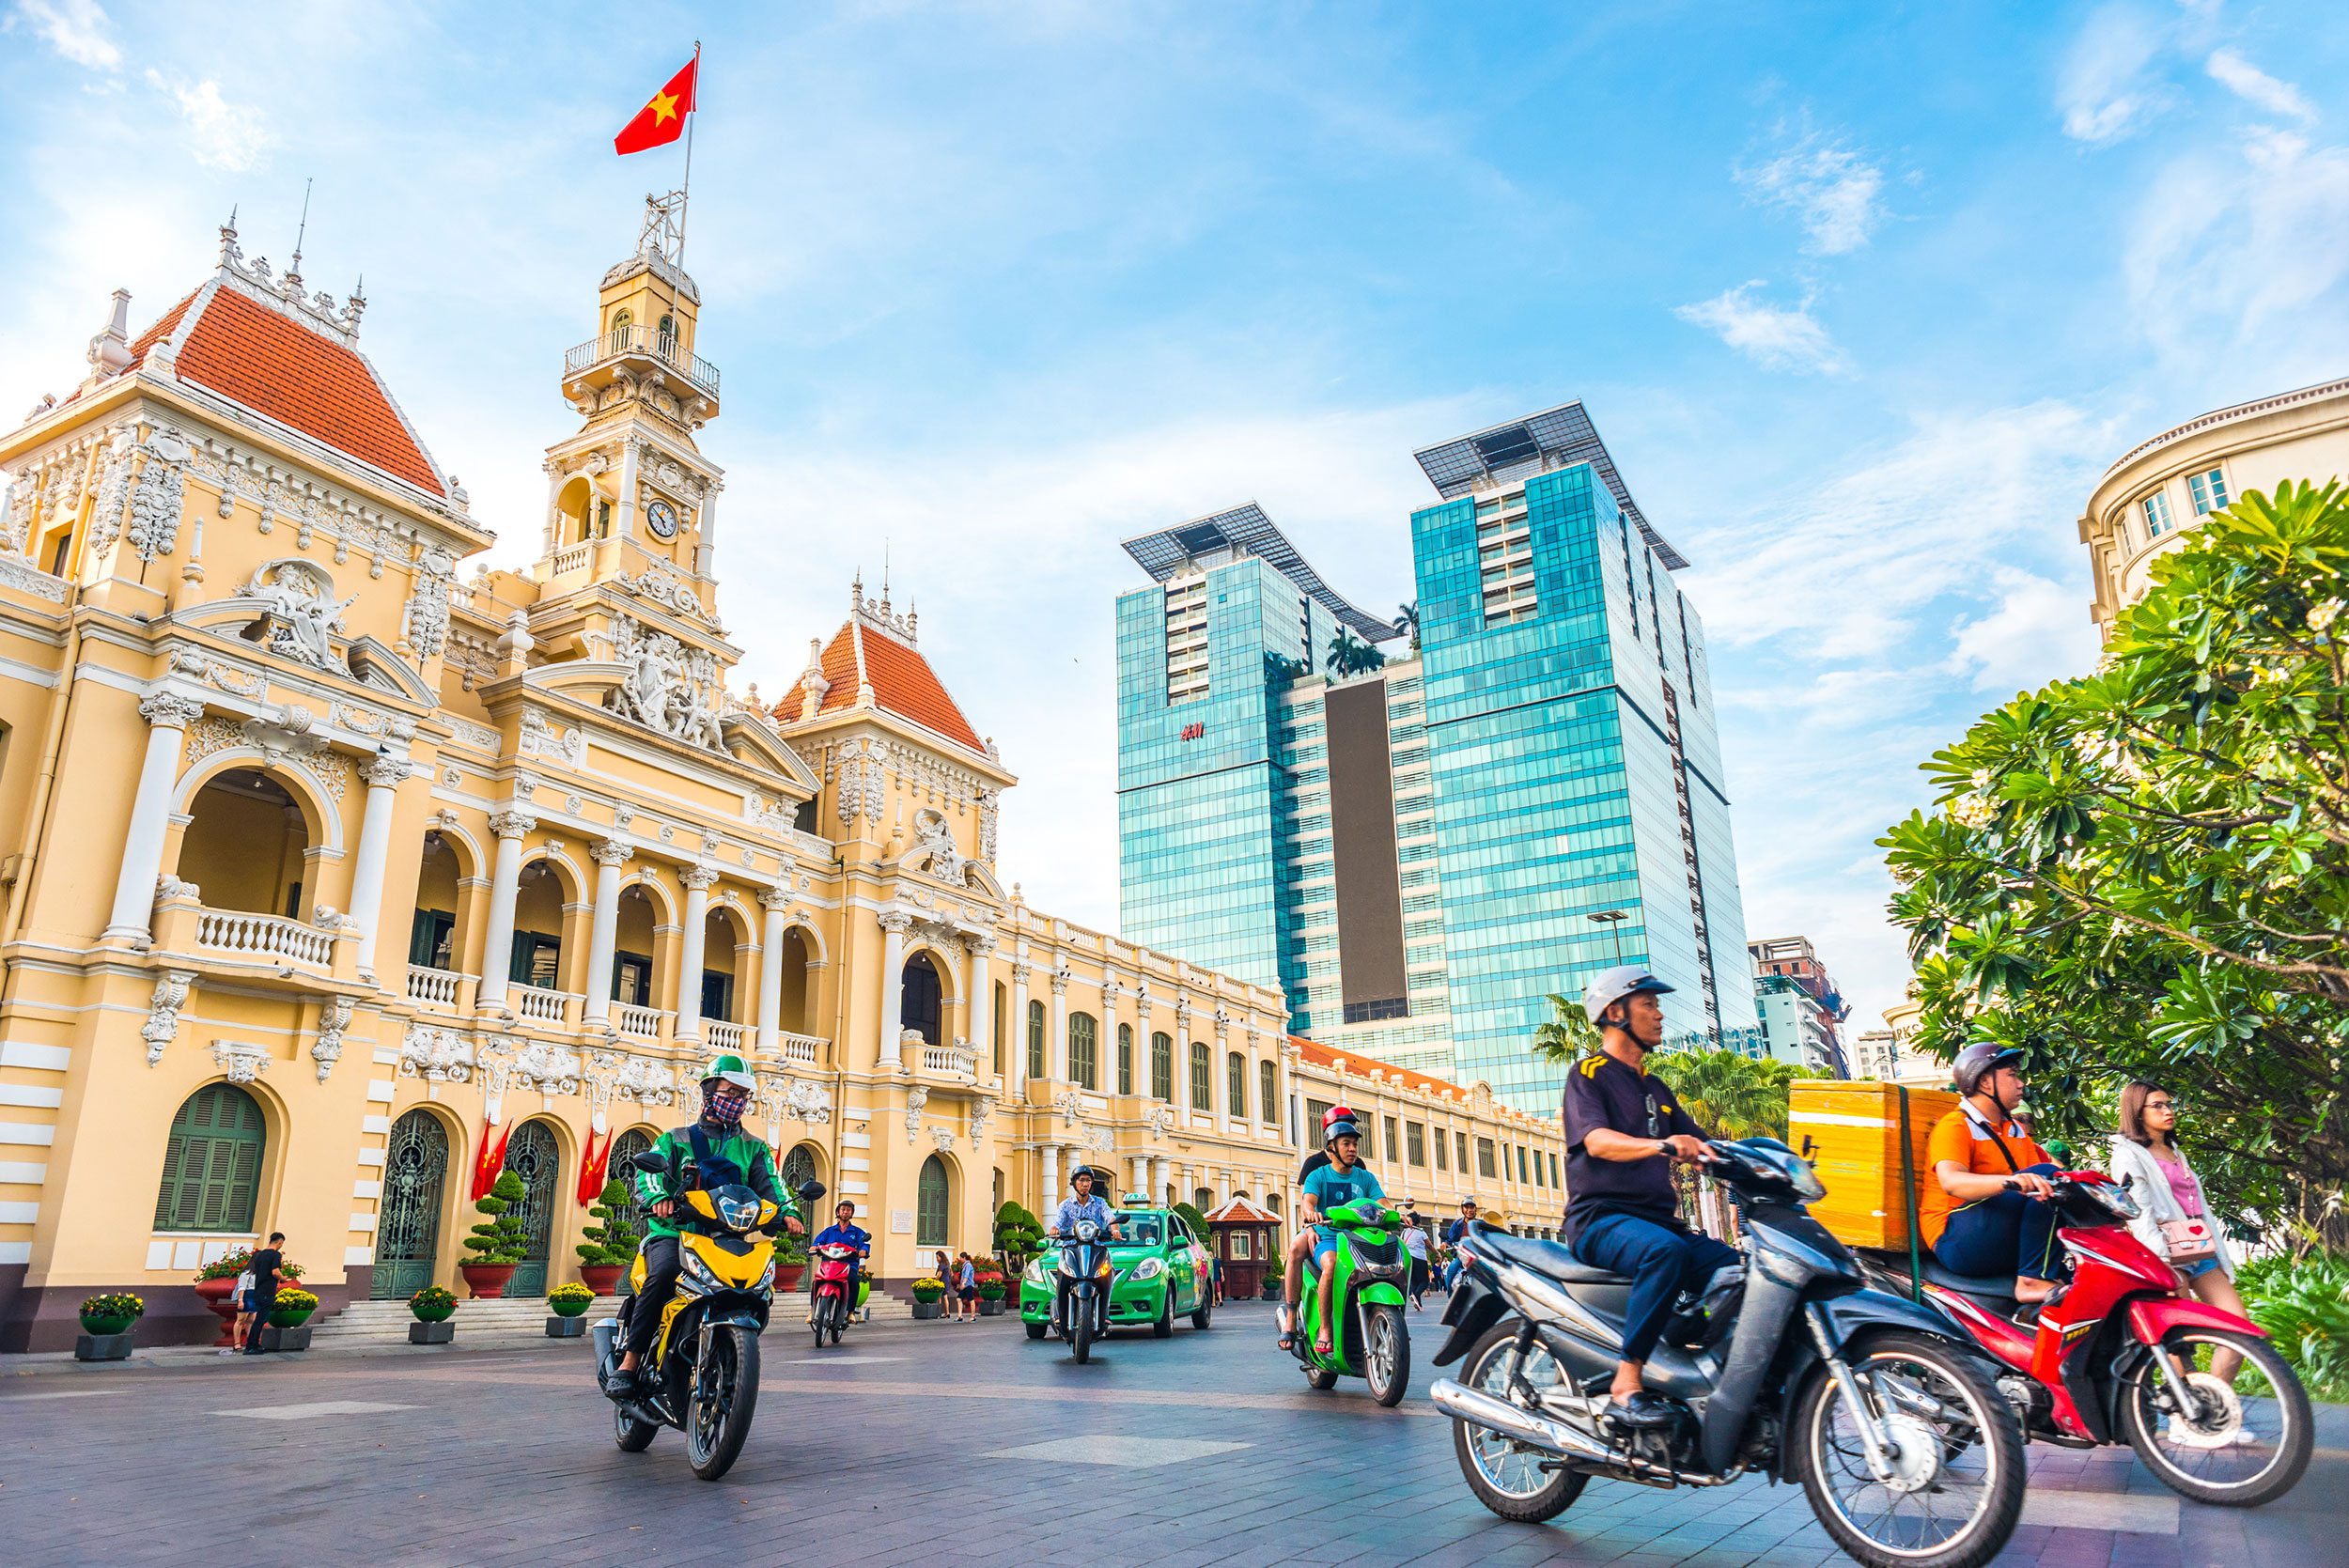 Welcome to Vibrant Ho Chi Minh City!